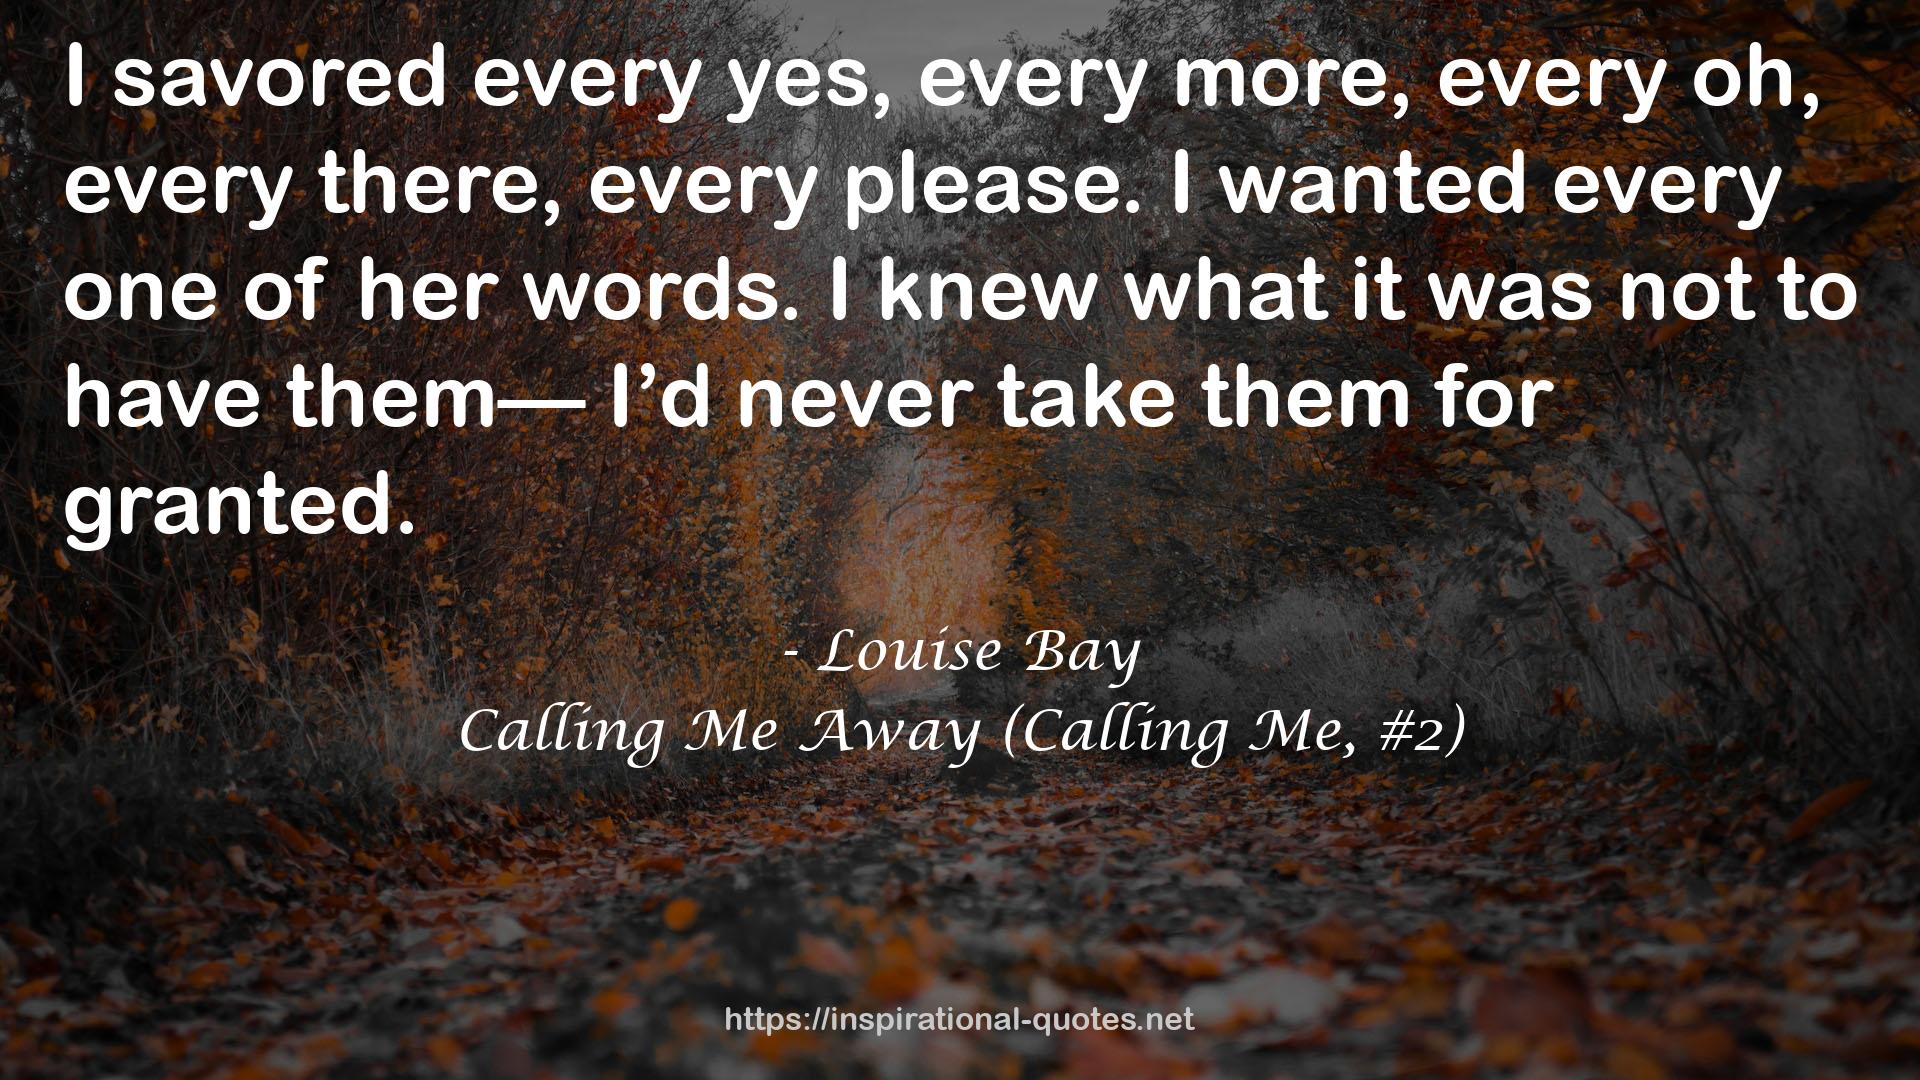 Calling Me Away (Calling Me, #2) QUOTES